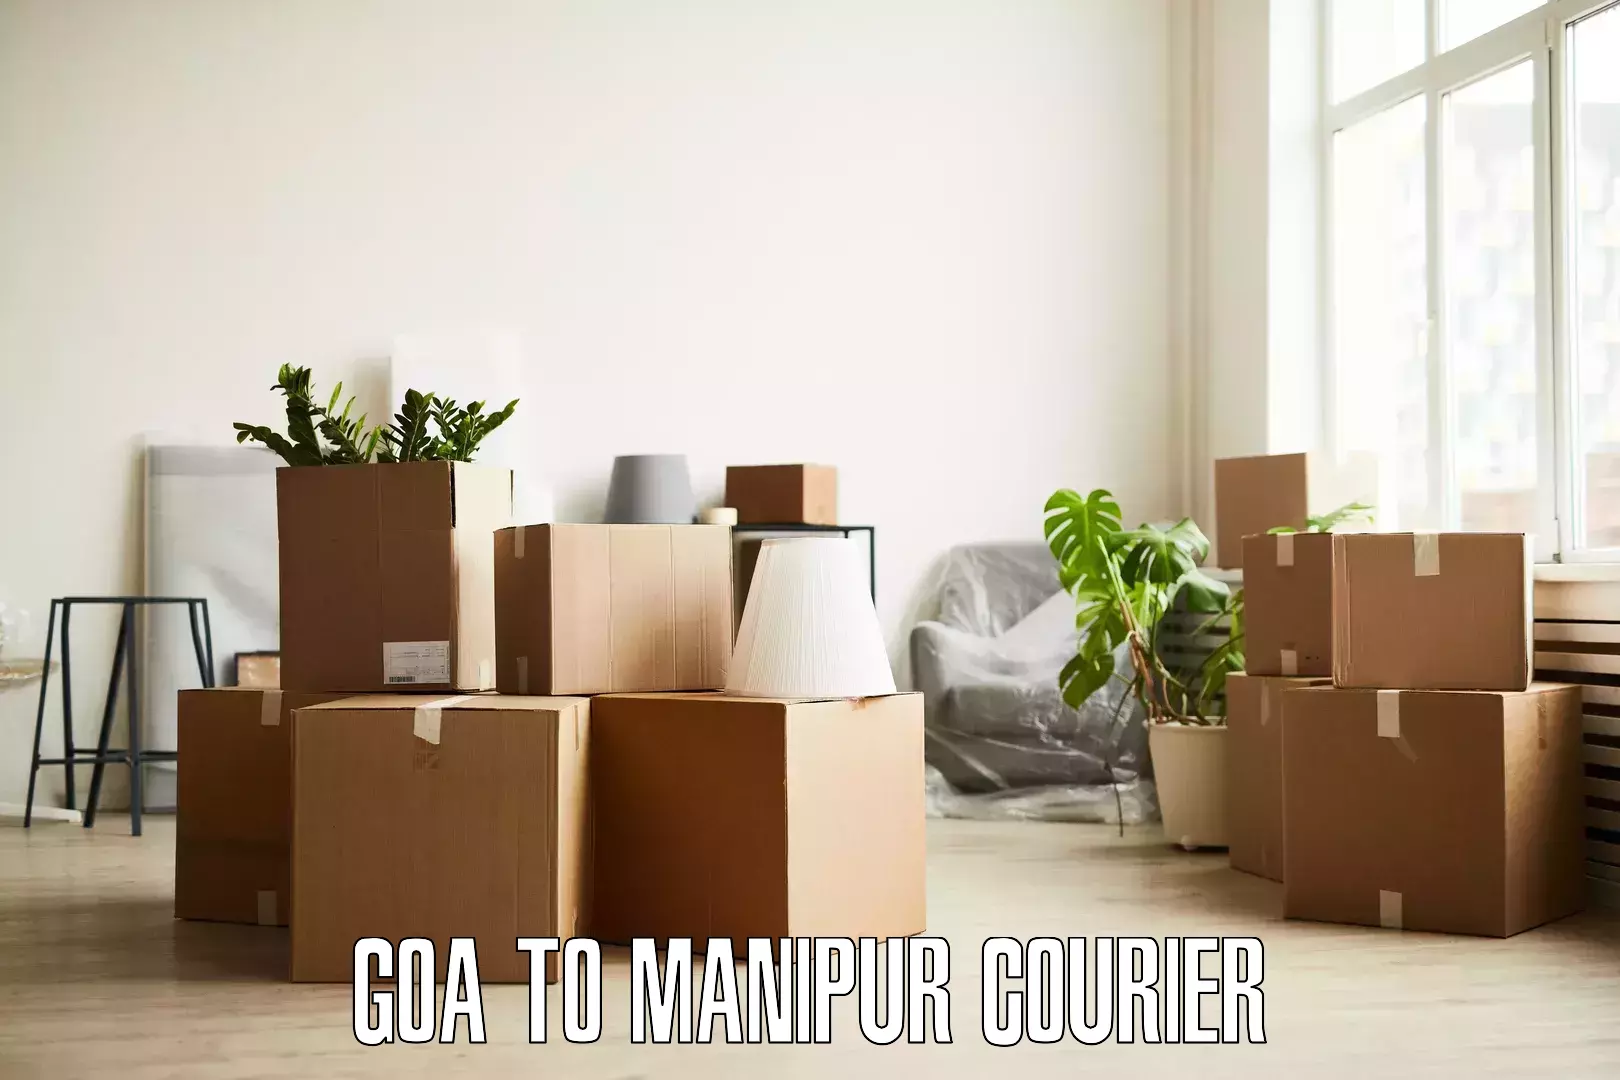 Furniture delivery service Goa to Manipur